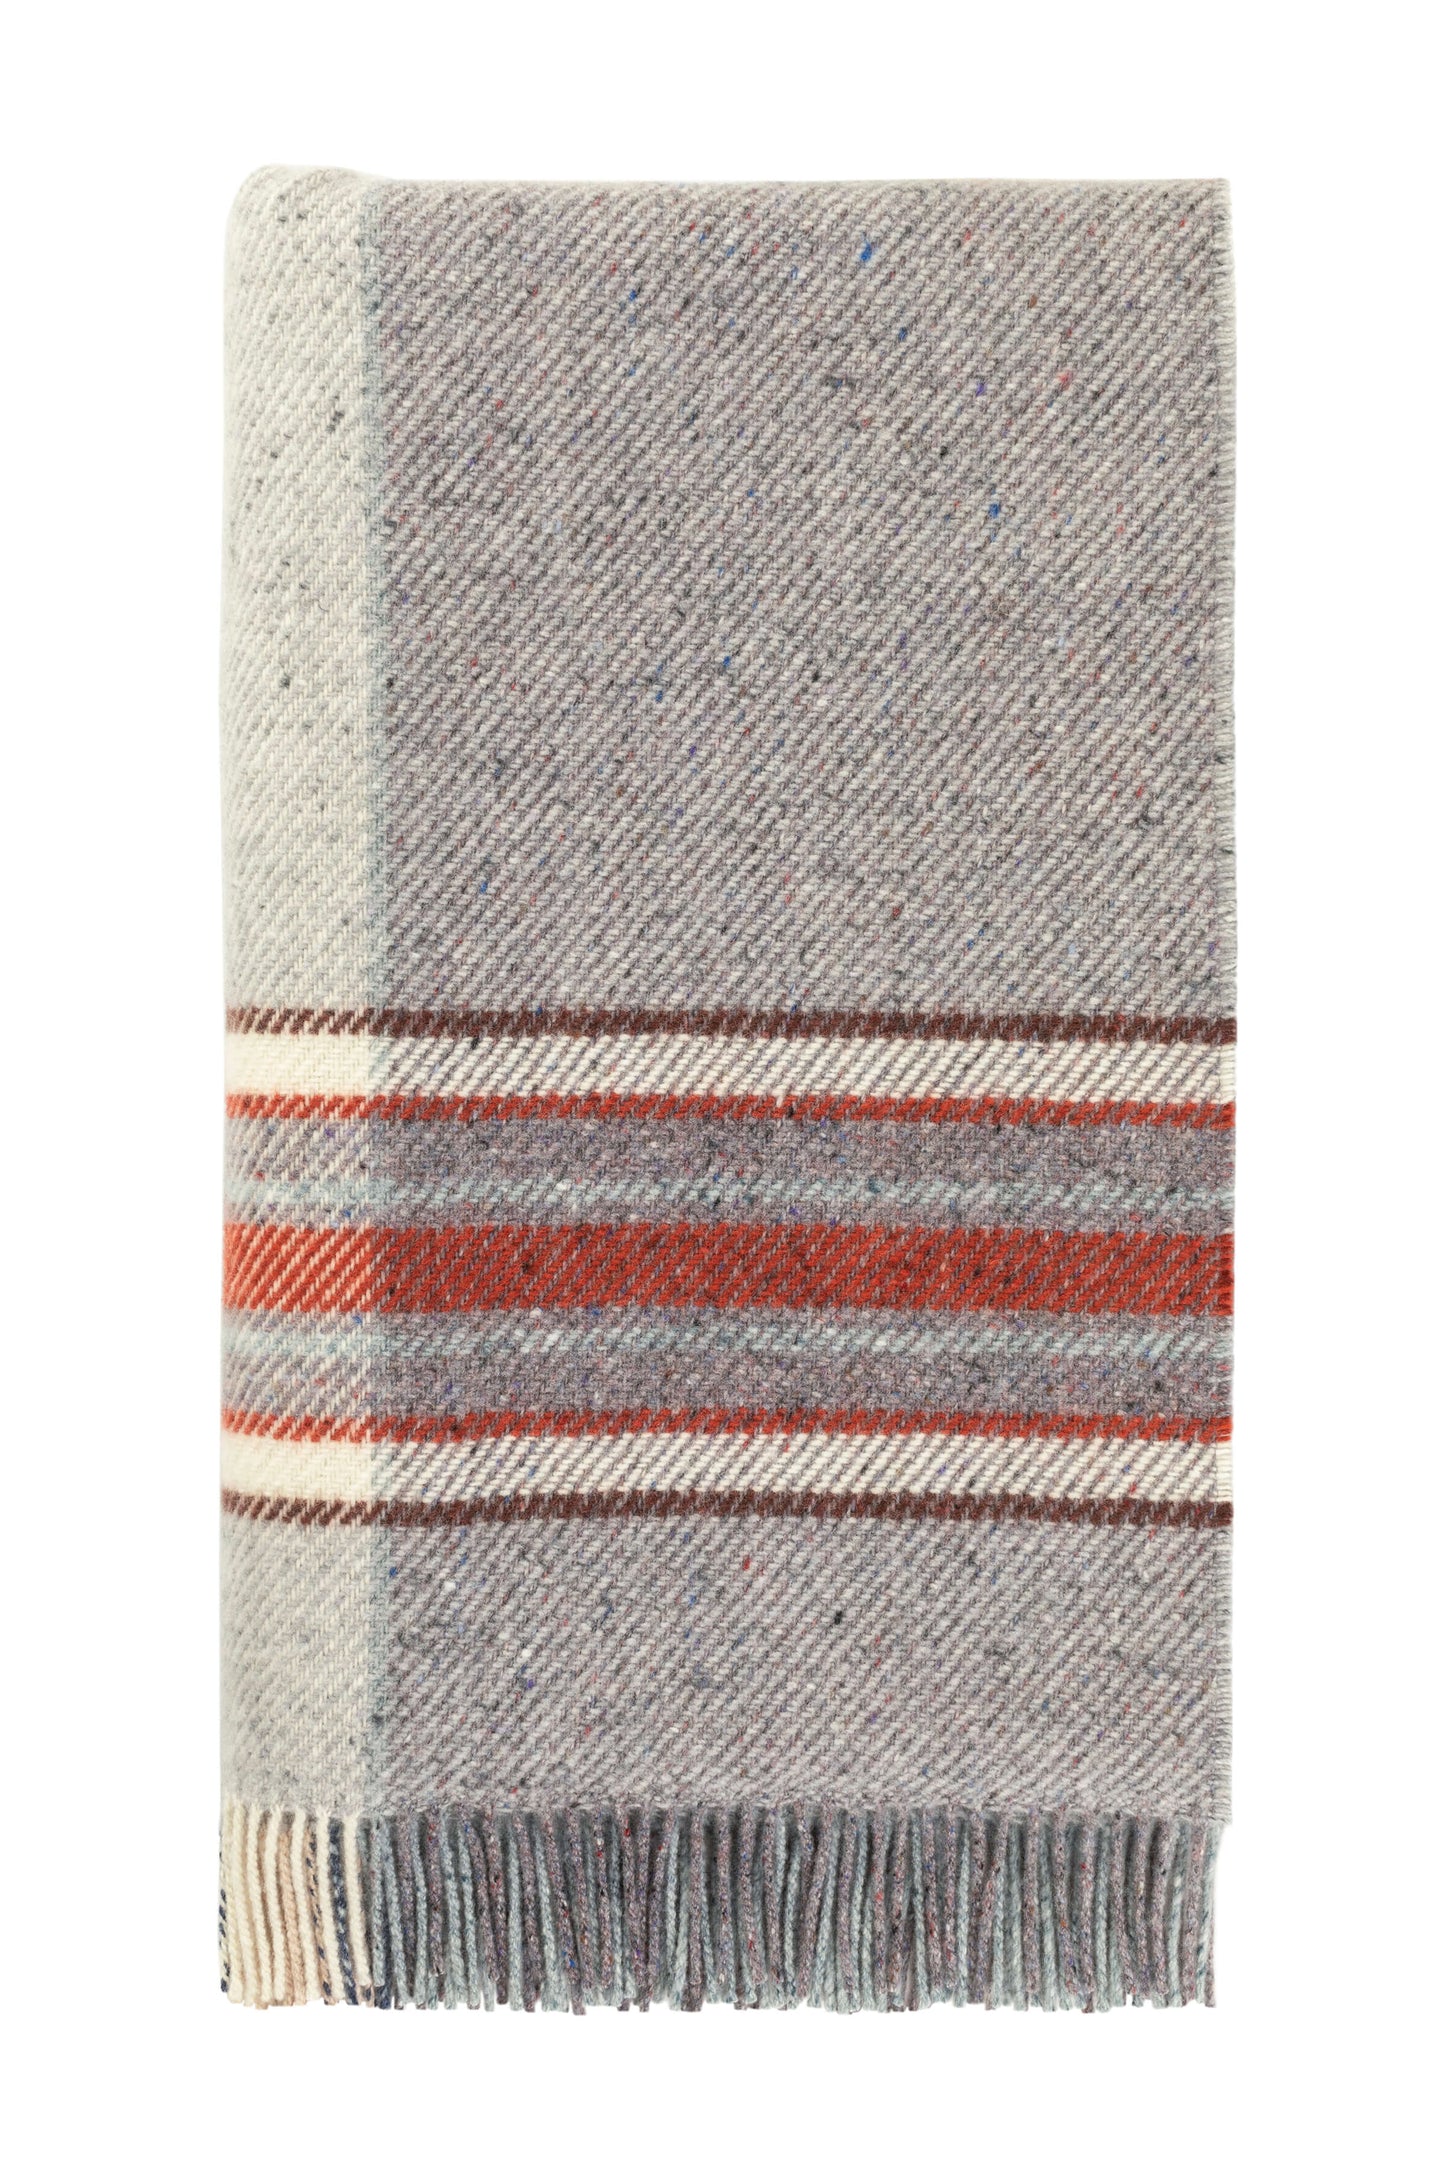 Johnstons of Elgin 2024 Blanket Collection Russet Donegal Check Bed Throw WB002616RU7551ONE